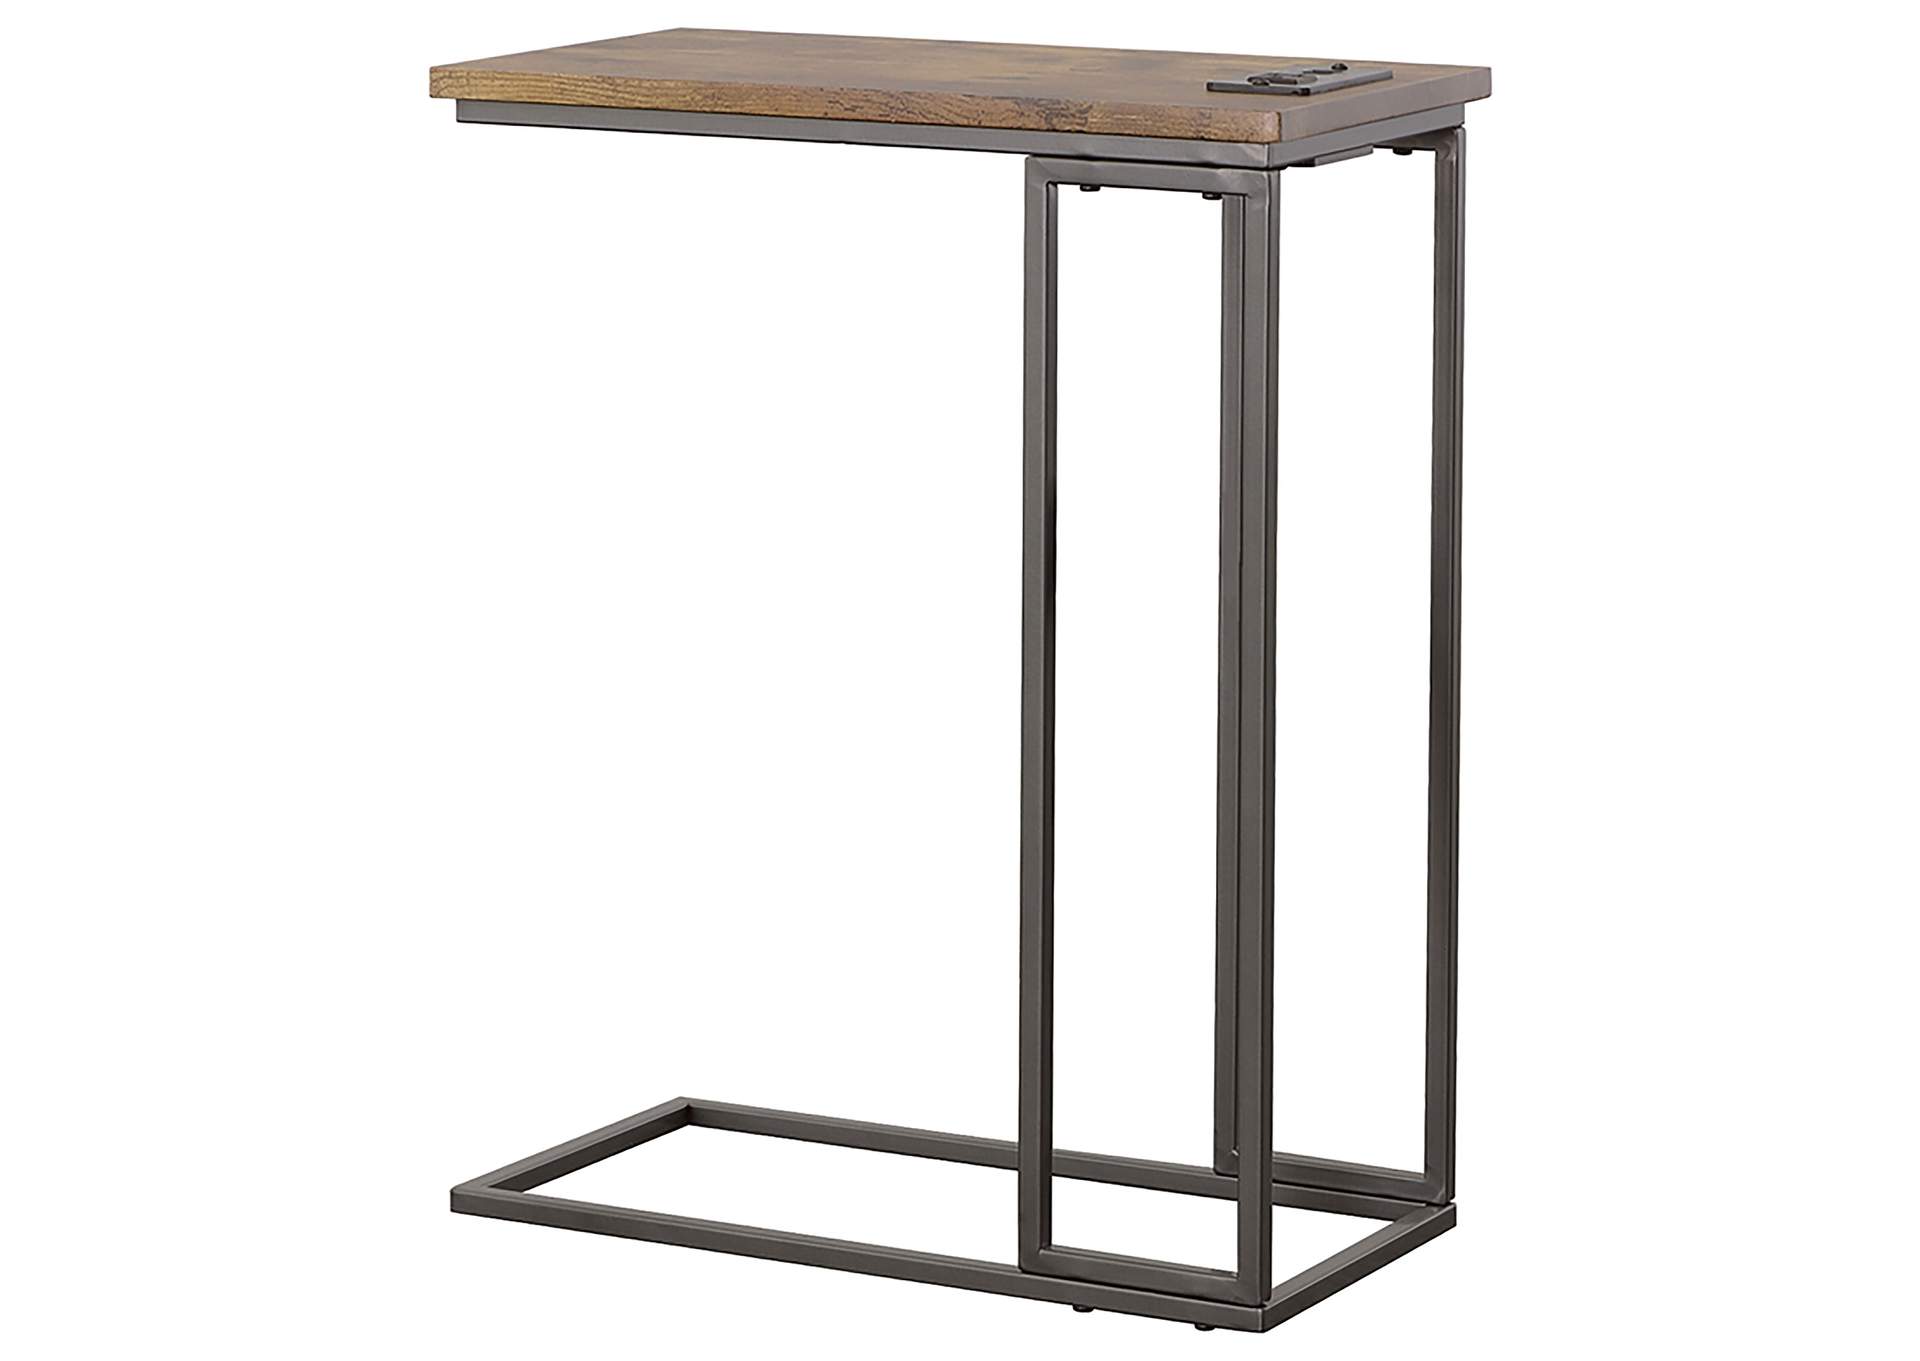 Rudy Snack Table with Power Outlet Gunmetal and Antique Brown,Coaster Furniture